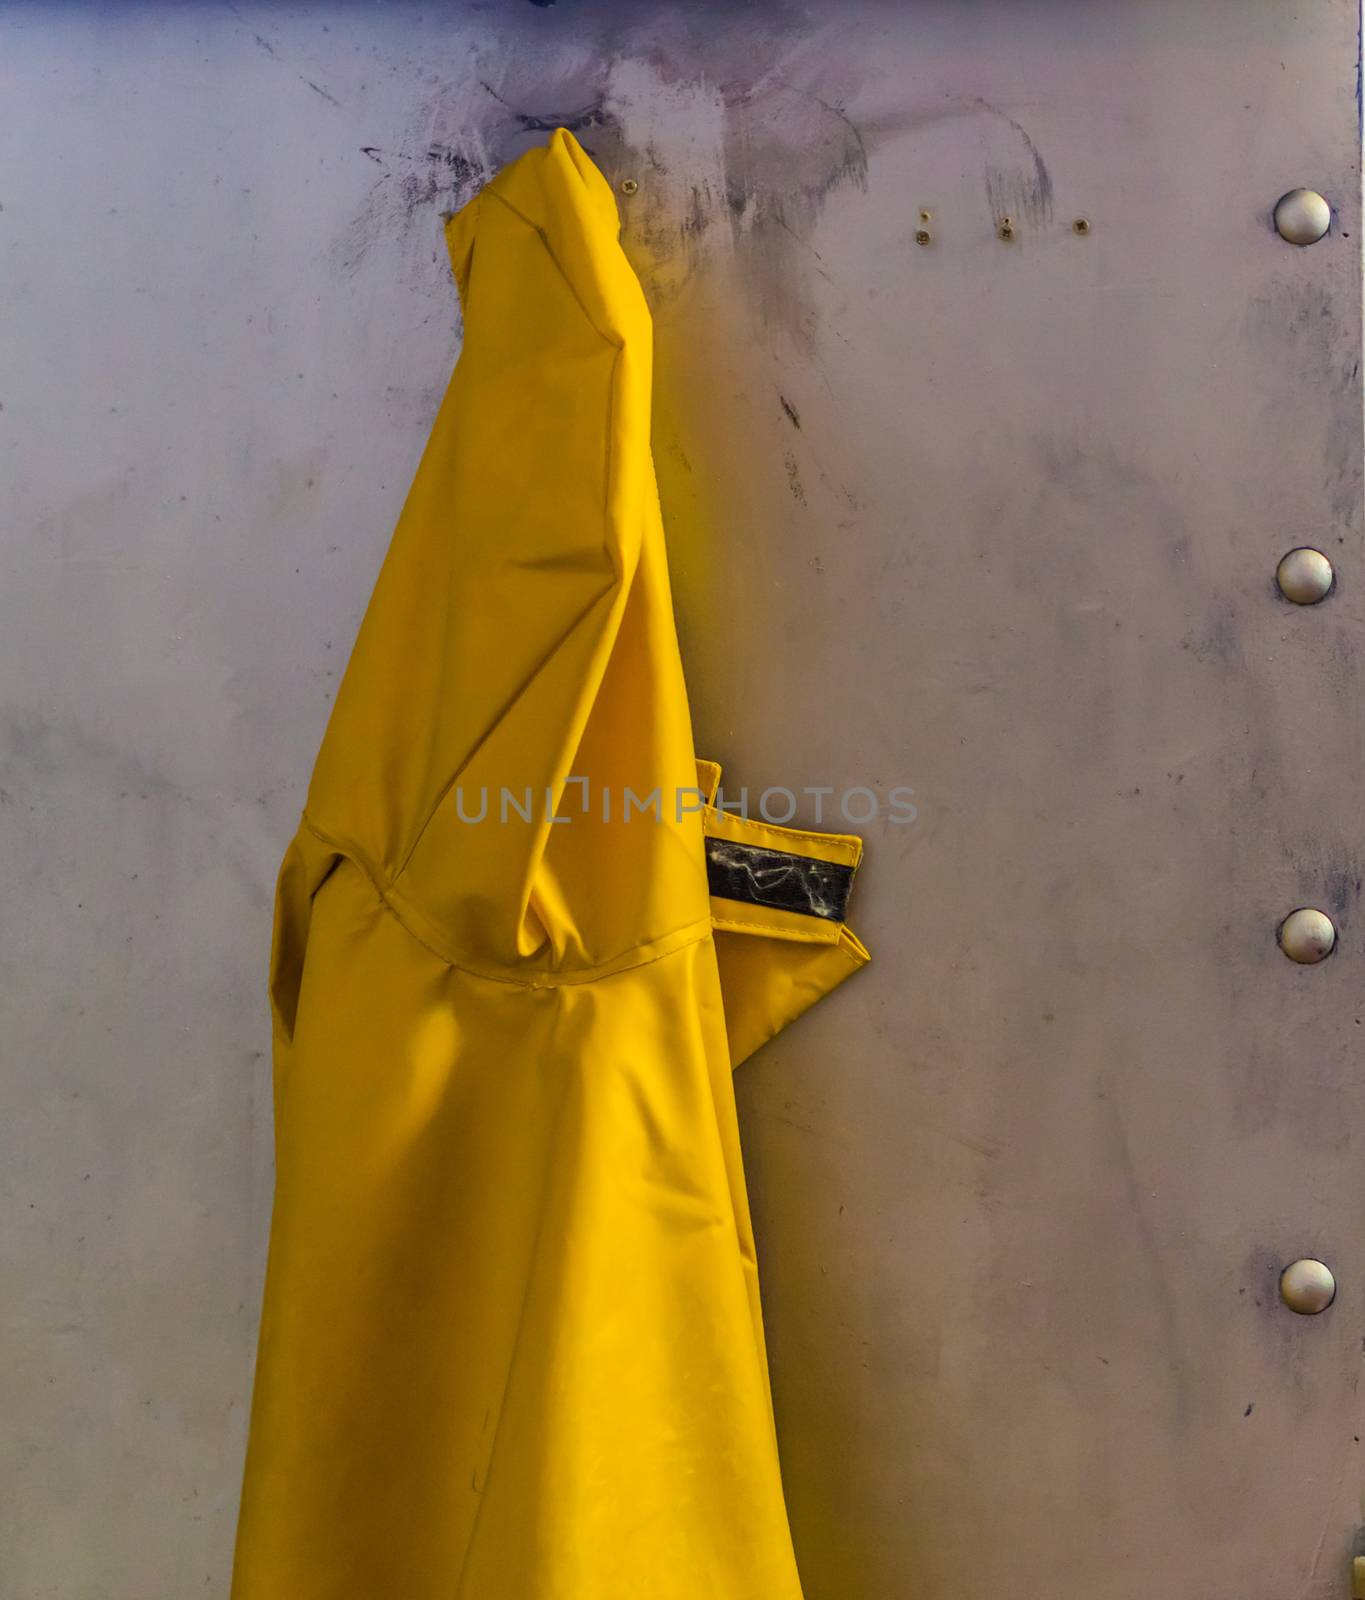 yellow raincoat hanging on a metal wall, Marine background, protective clothing for rainy days